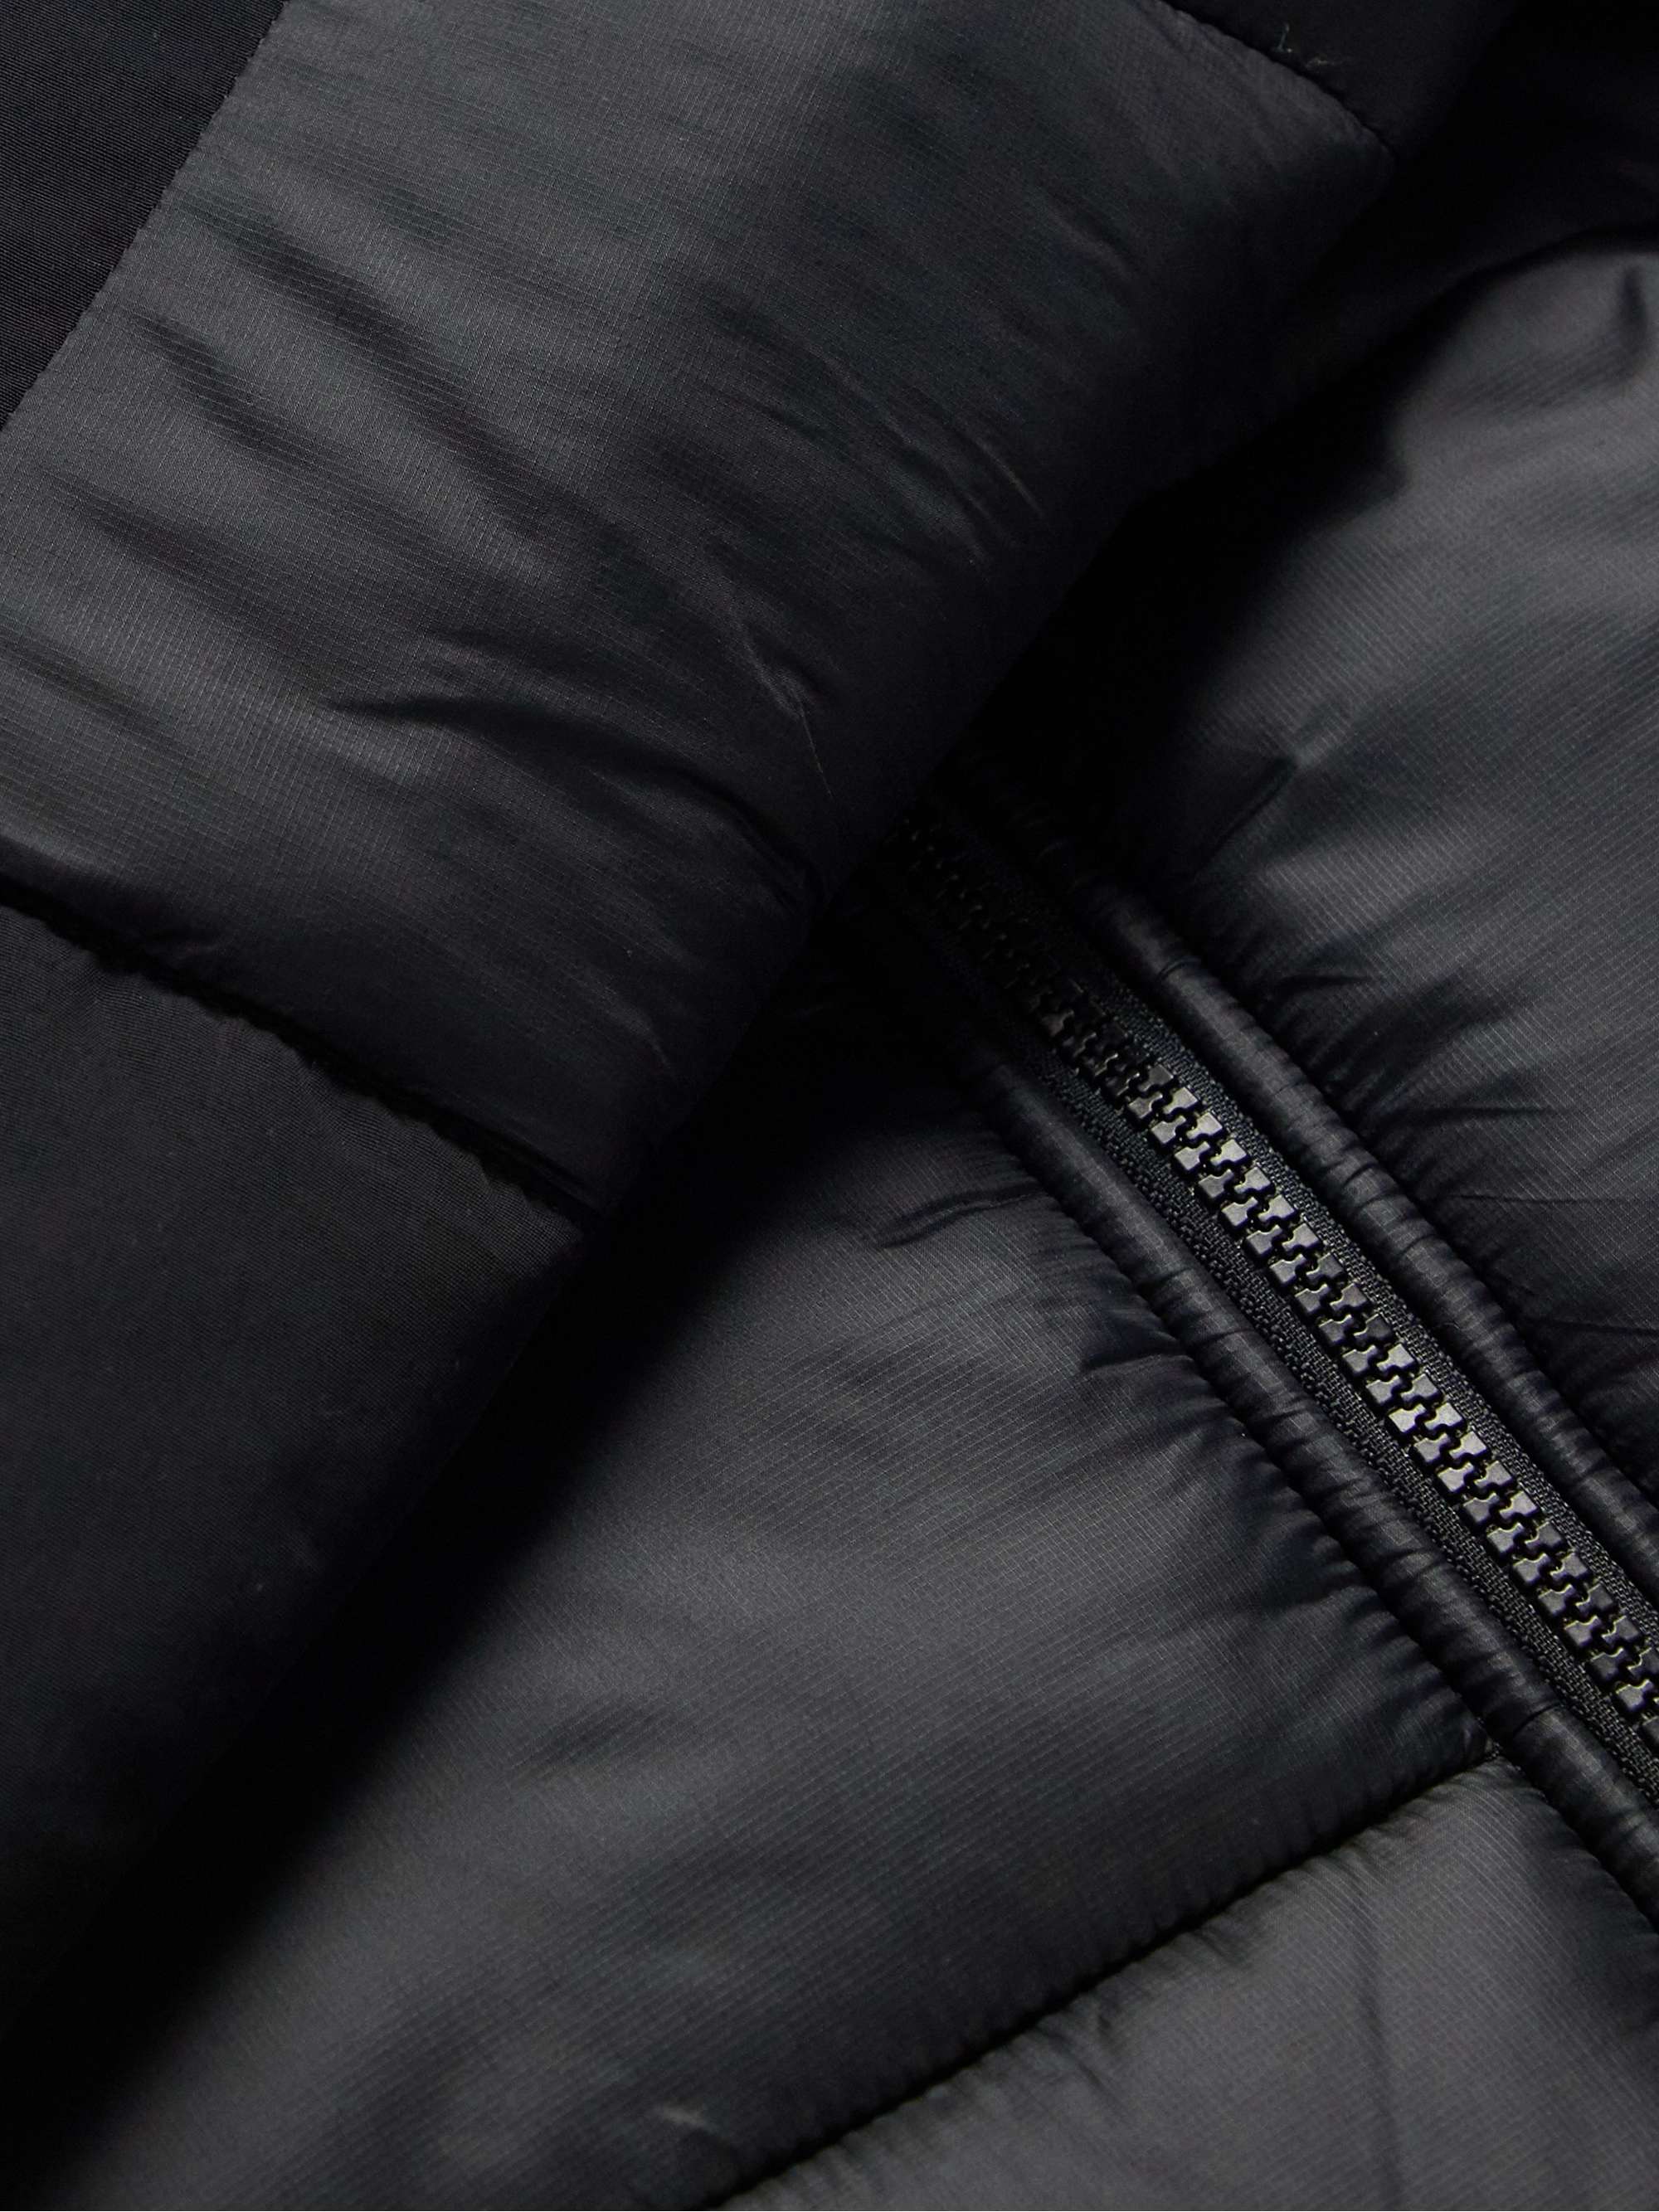 THE NORTH FACE Himalayan Logo-Embroidered Quilted Ripstop Padded Jacket